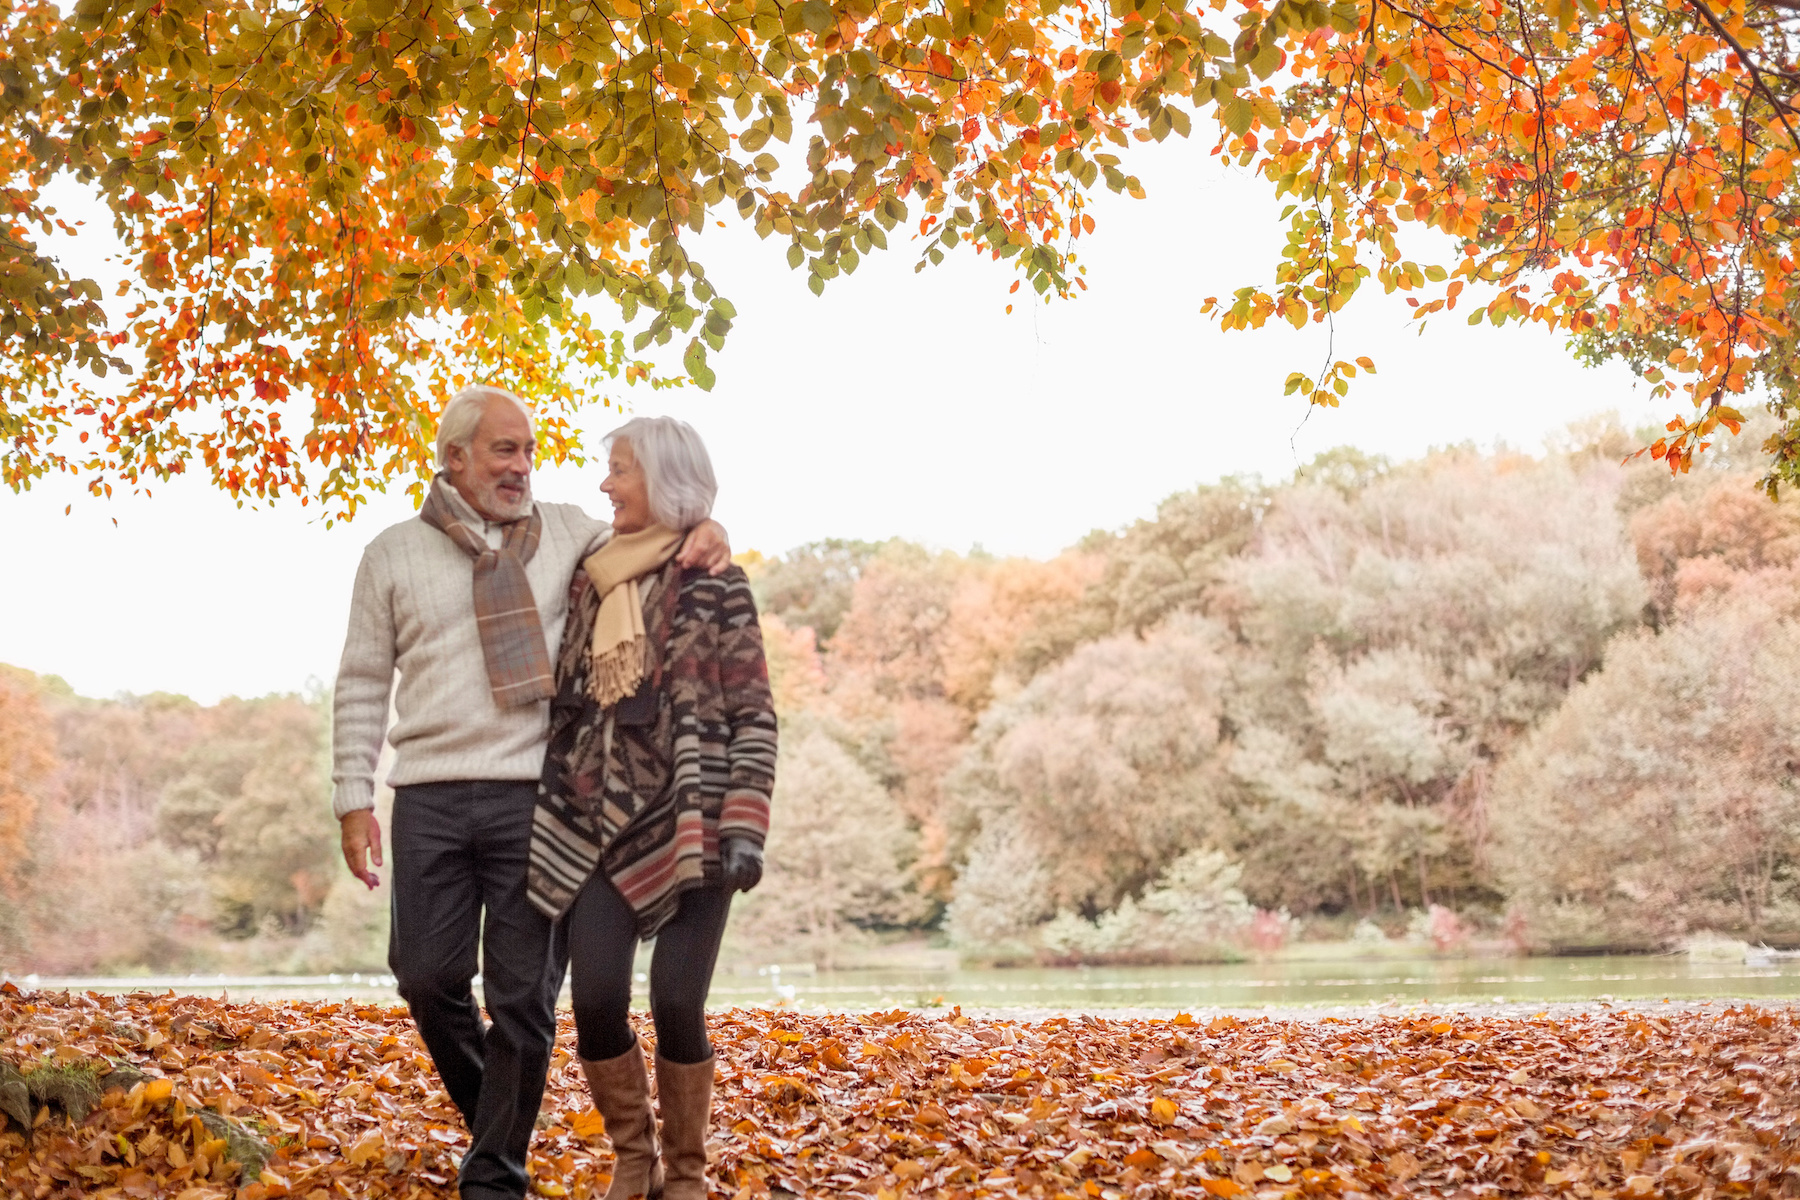 A man with his arm around a woman talks about his estate planning wishes as they walk among trees.